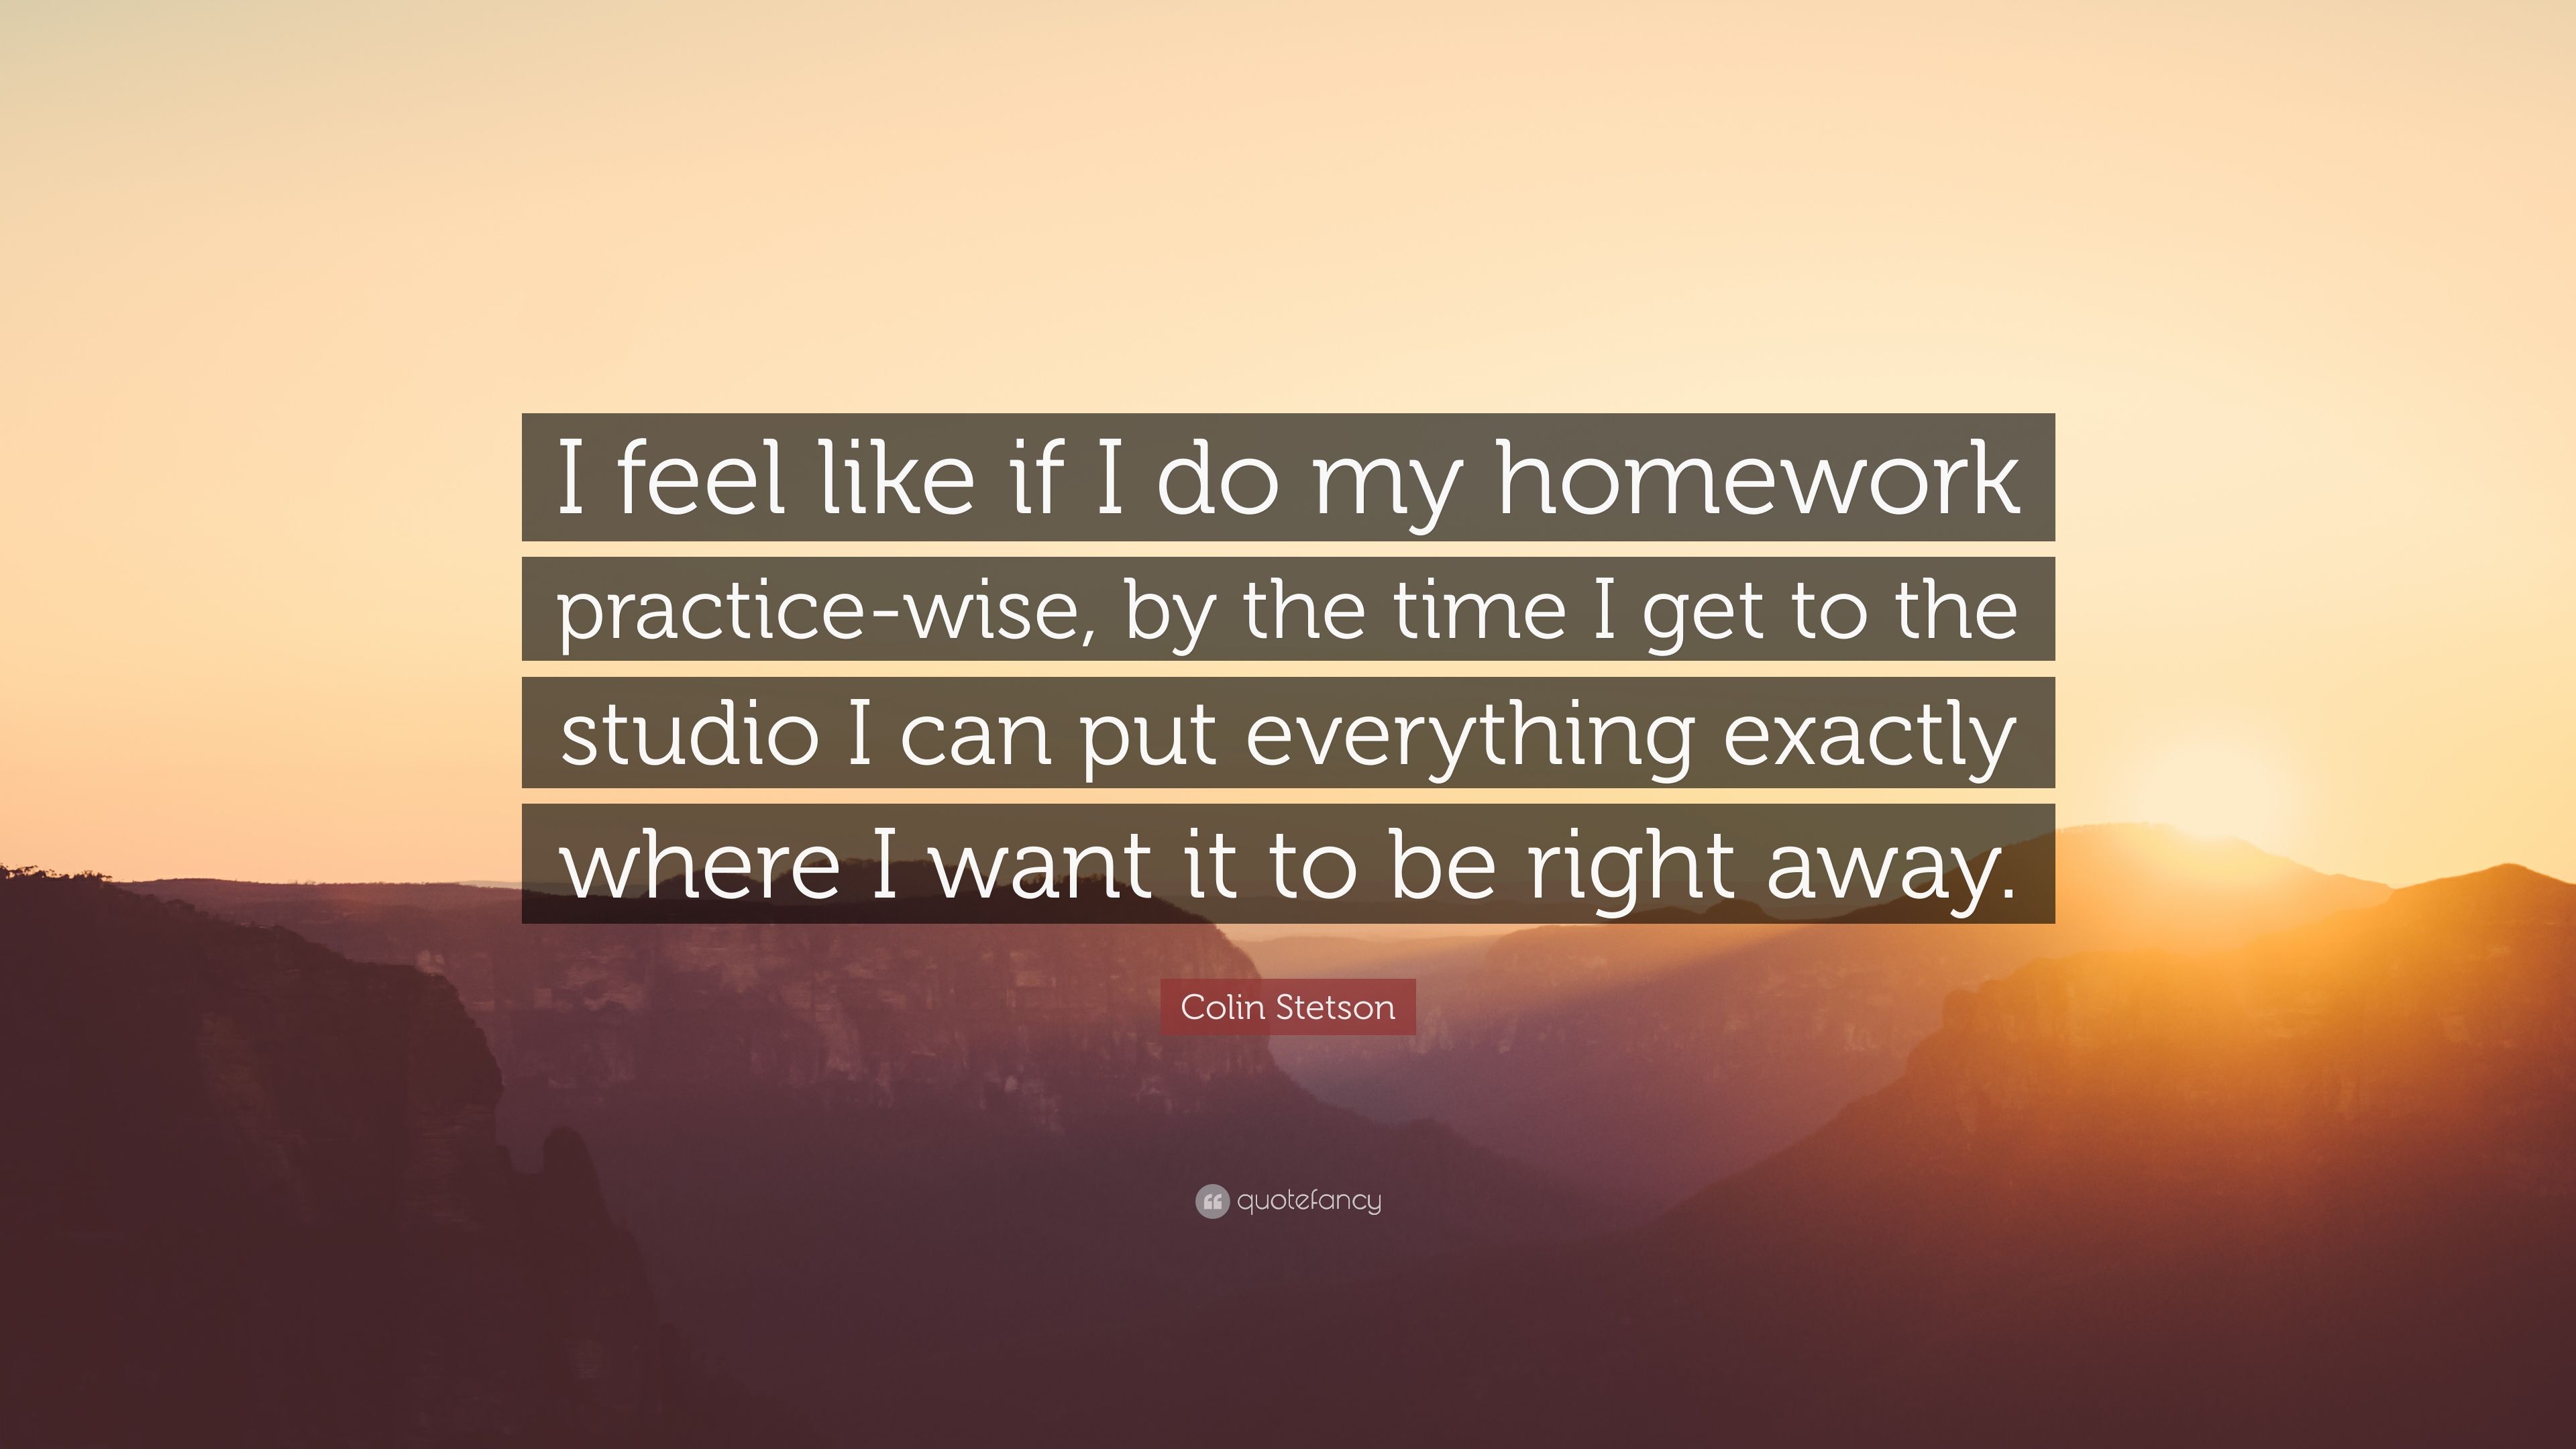 Colin Stetson Quote: “I Feel Like If I Do My Homework Practice Wise, By The Time I Get To The Studio I Can Put Everything Exactly Where I Want.” (7 Wallpaper)